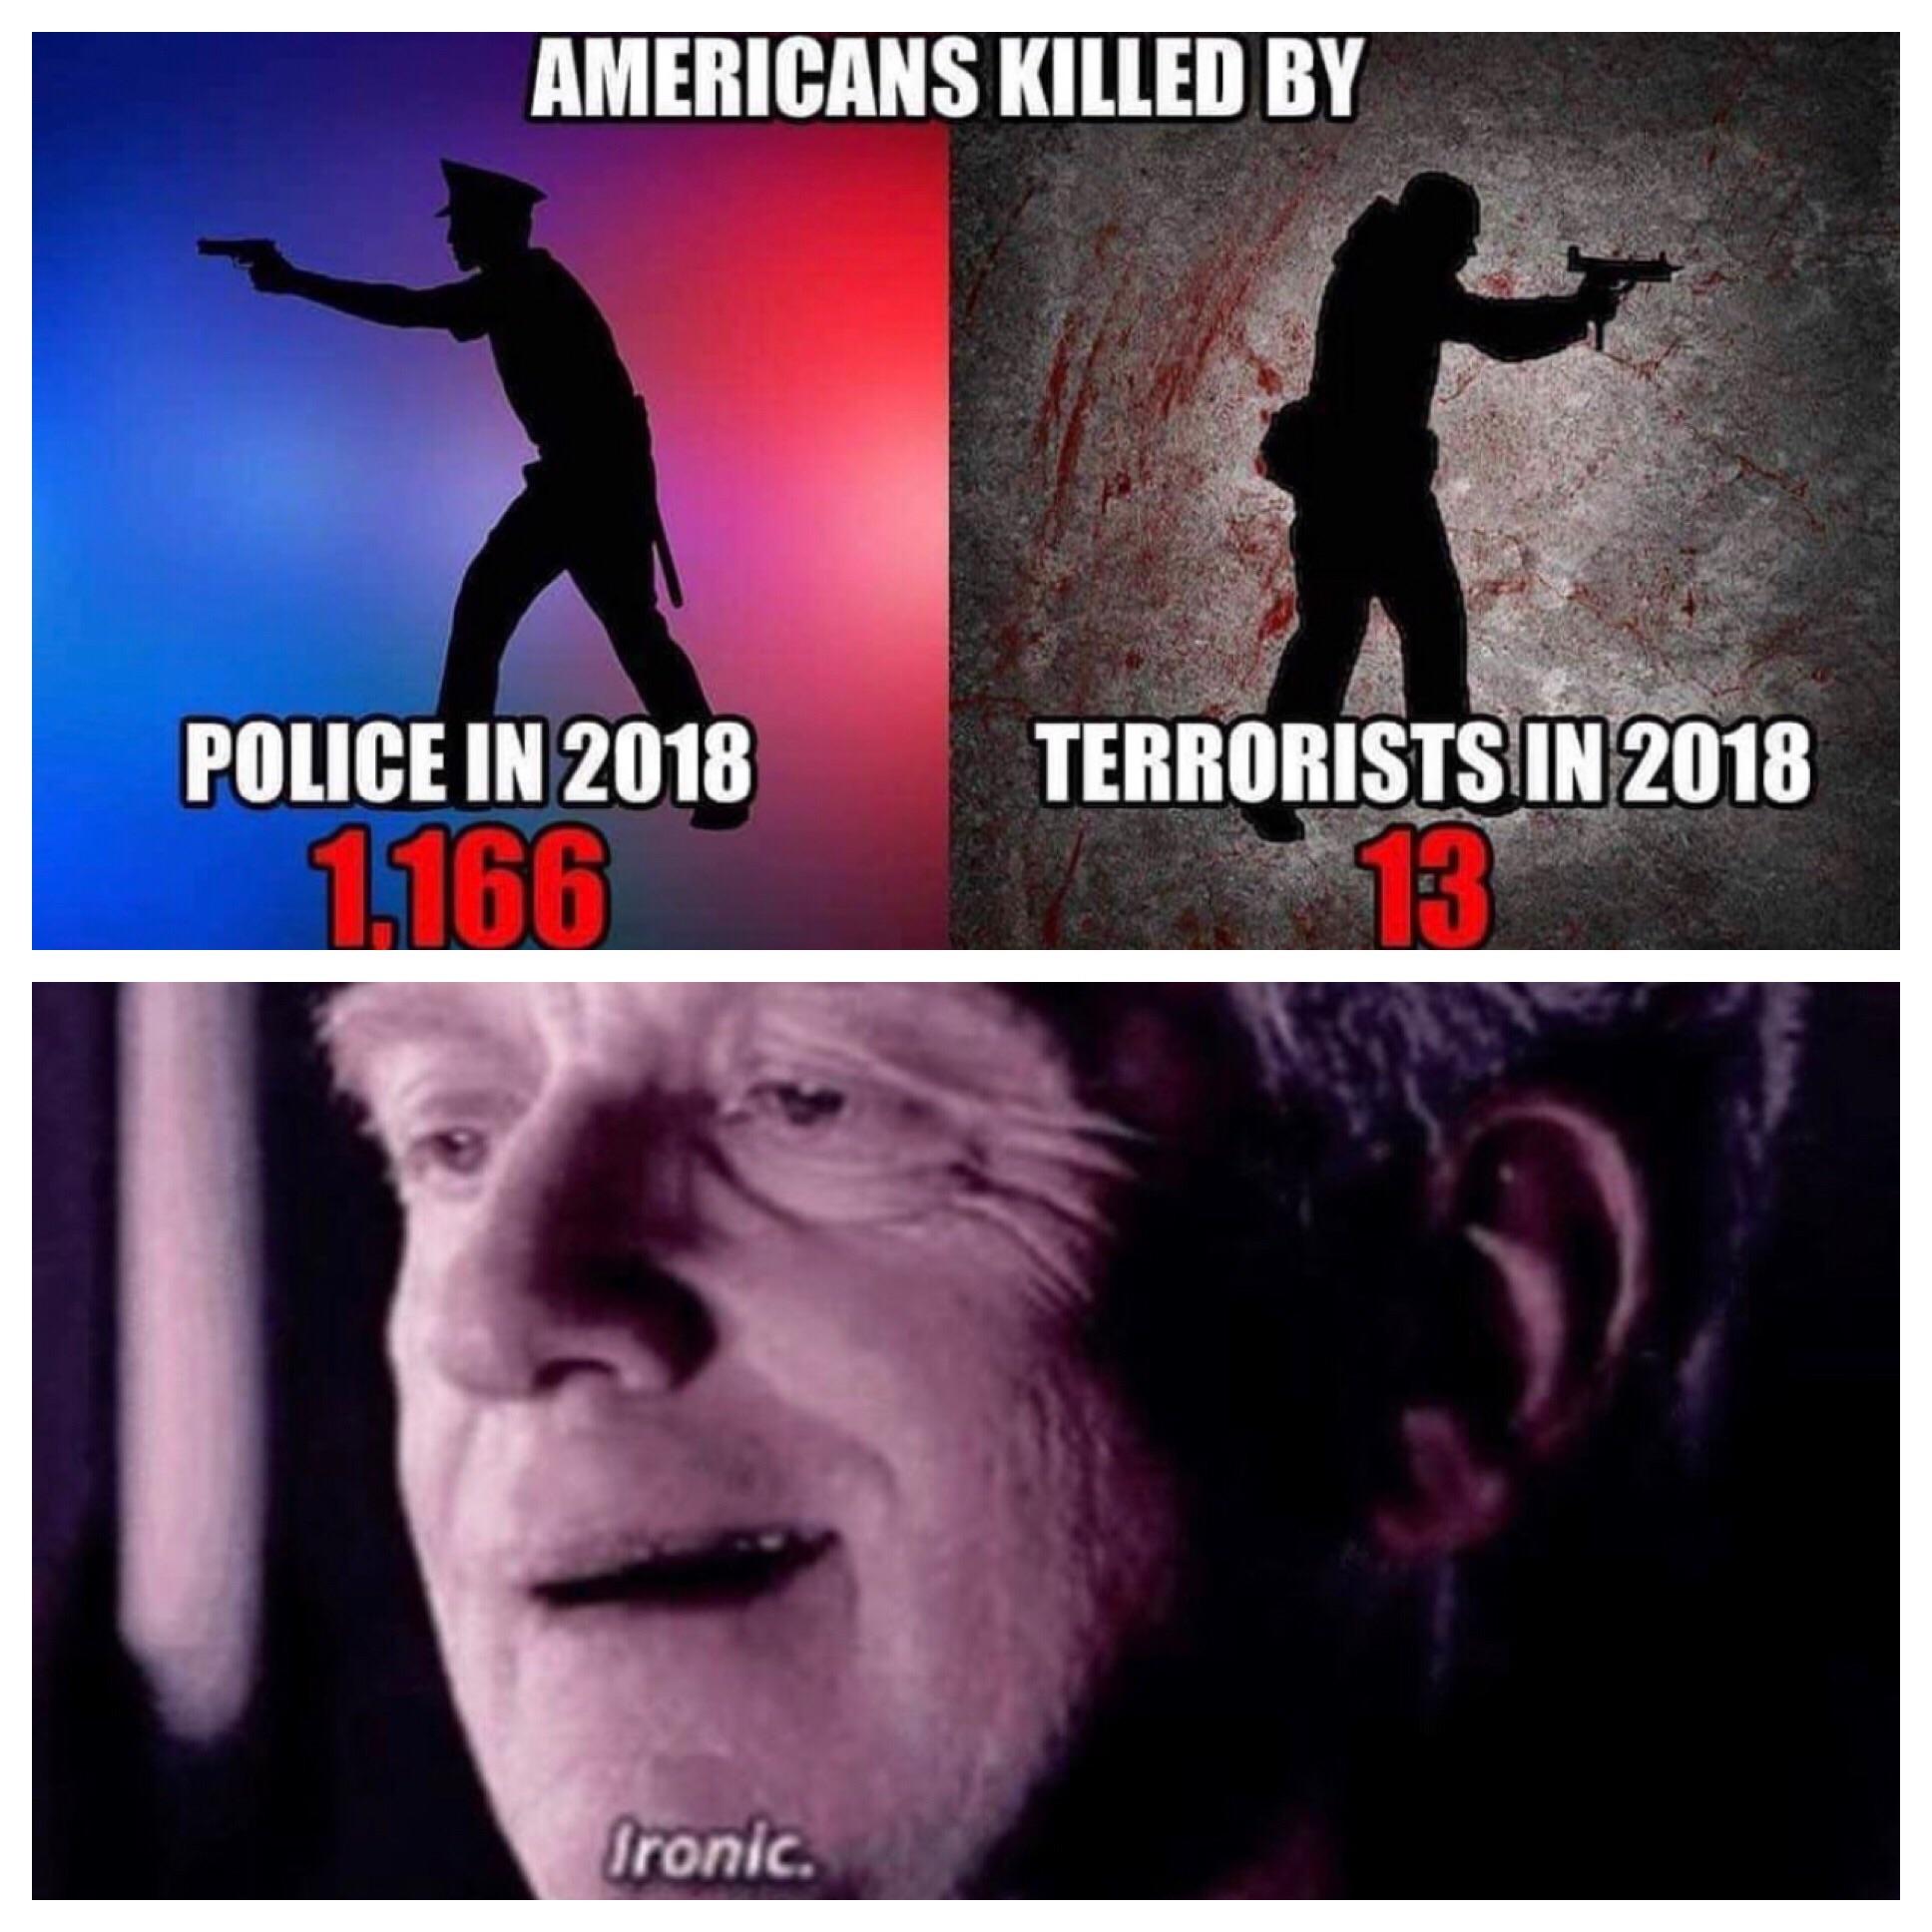 ironic palpatine - Americans Killed By Terrorists In 2018 Police In 2018 1166 Ironic.